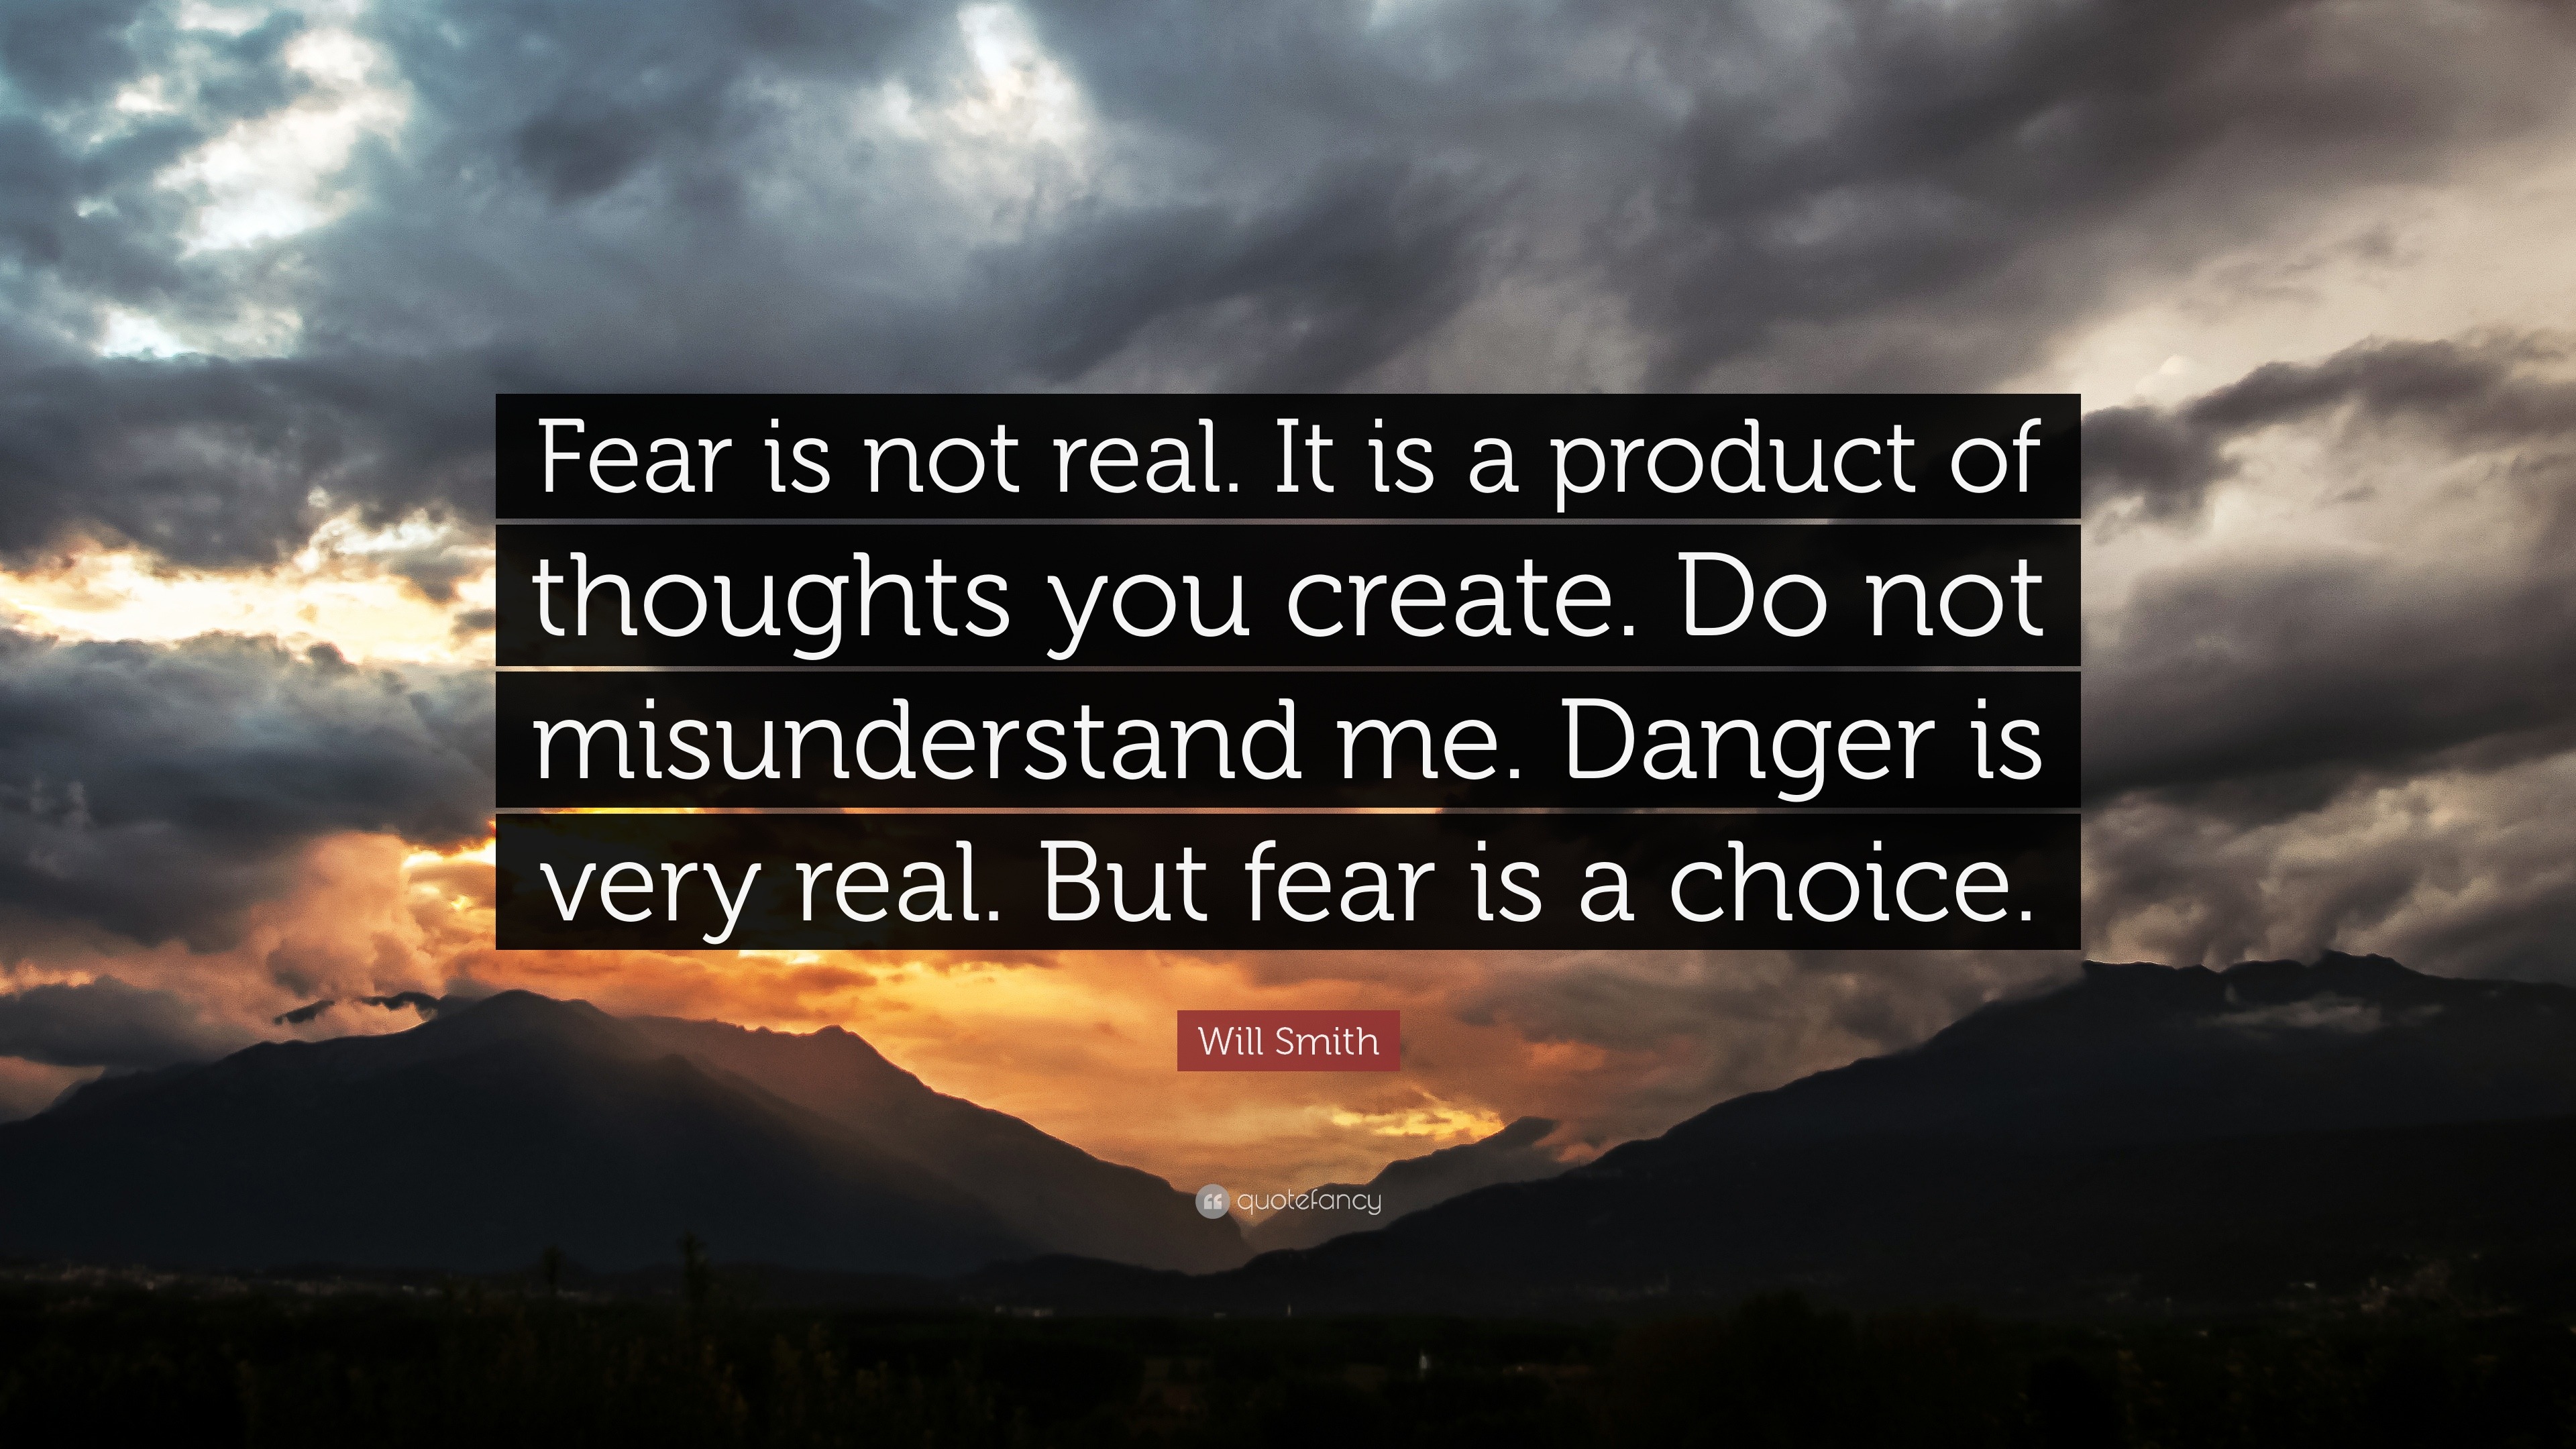 Will Smith Quote “fear Is Not Real It Is A Product Of Thoughts You Create Do Not